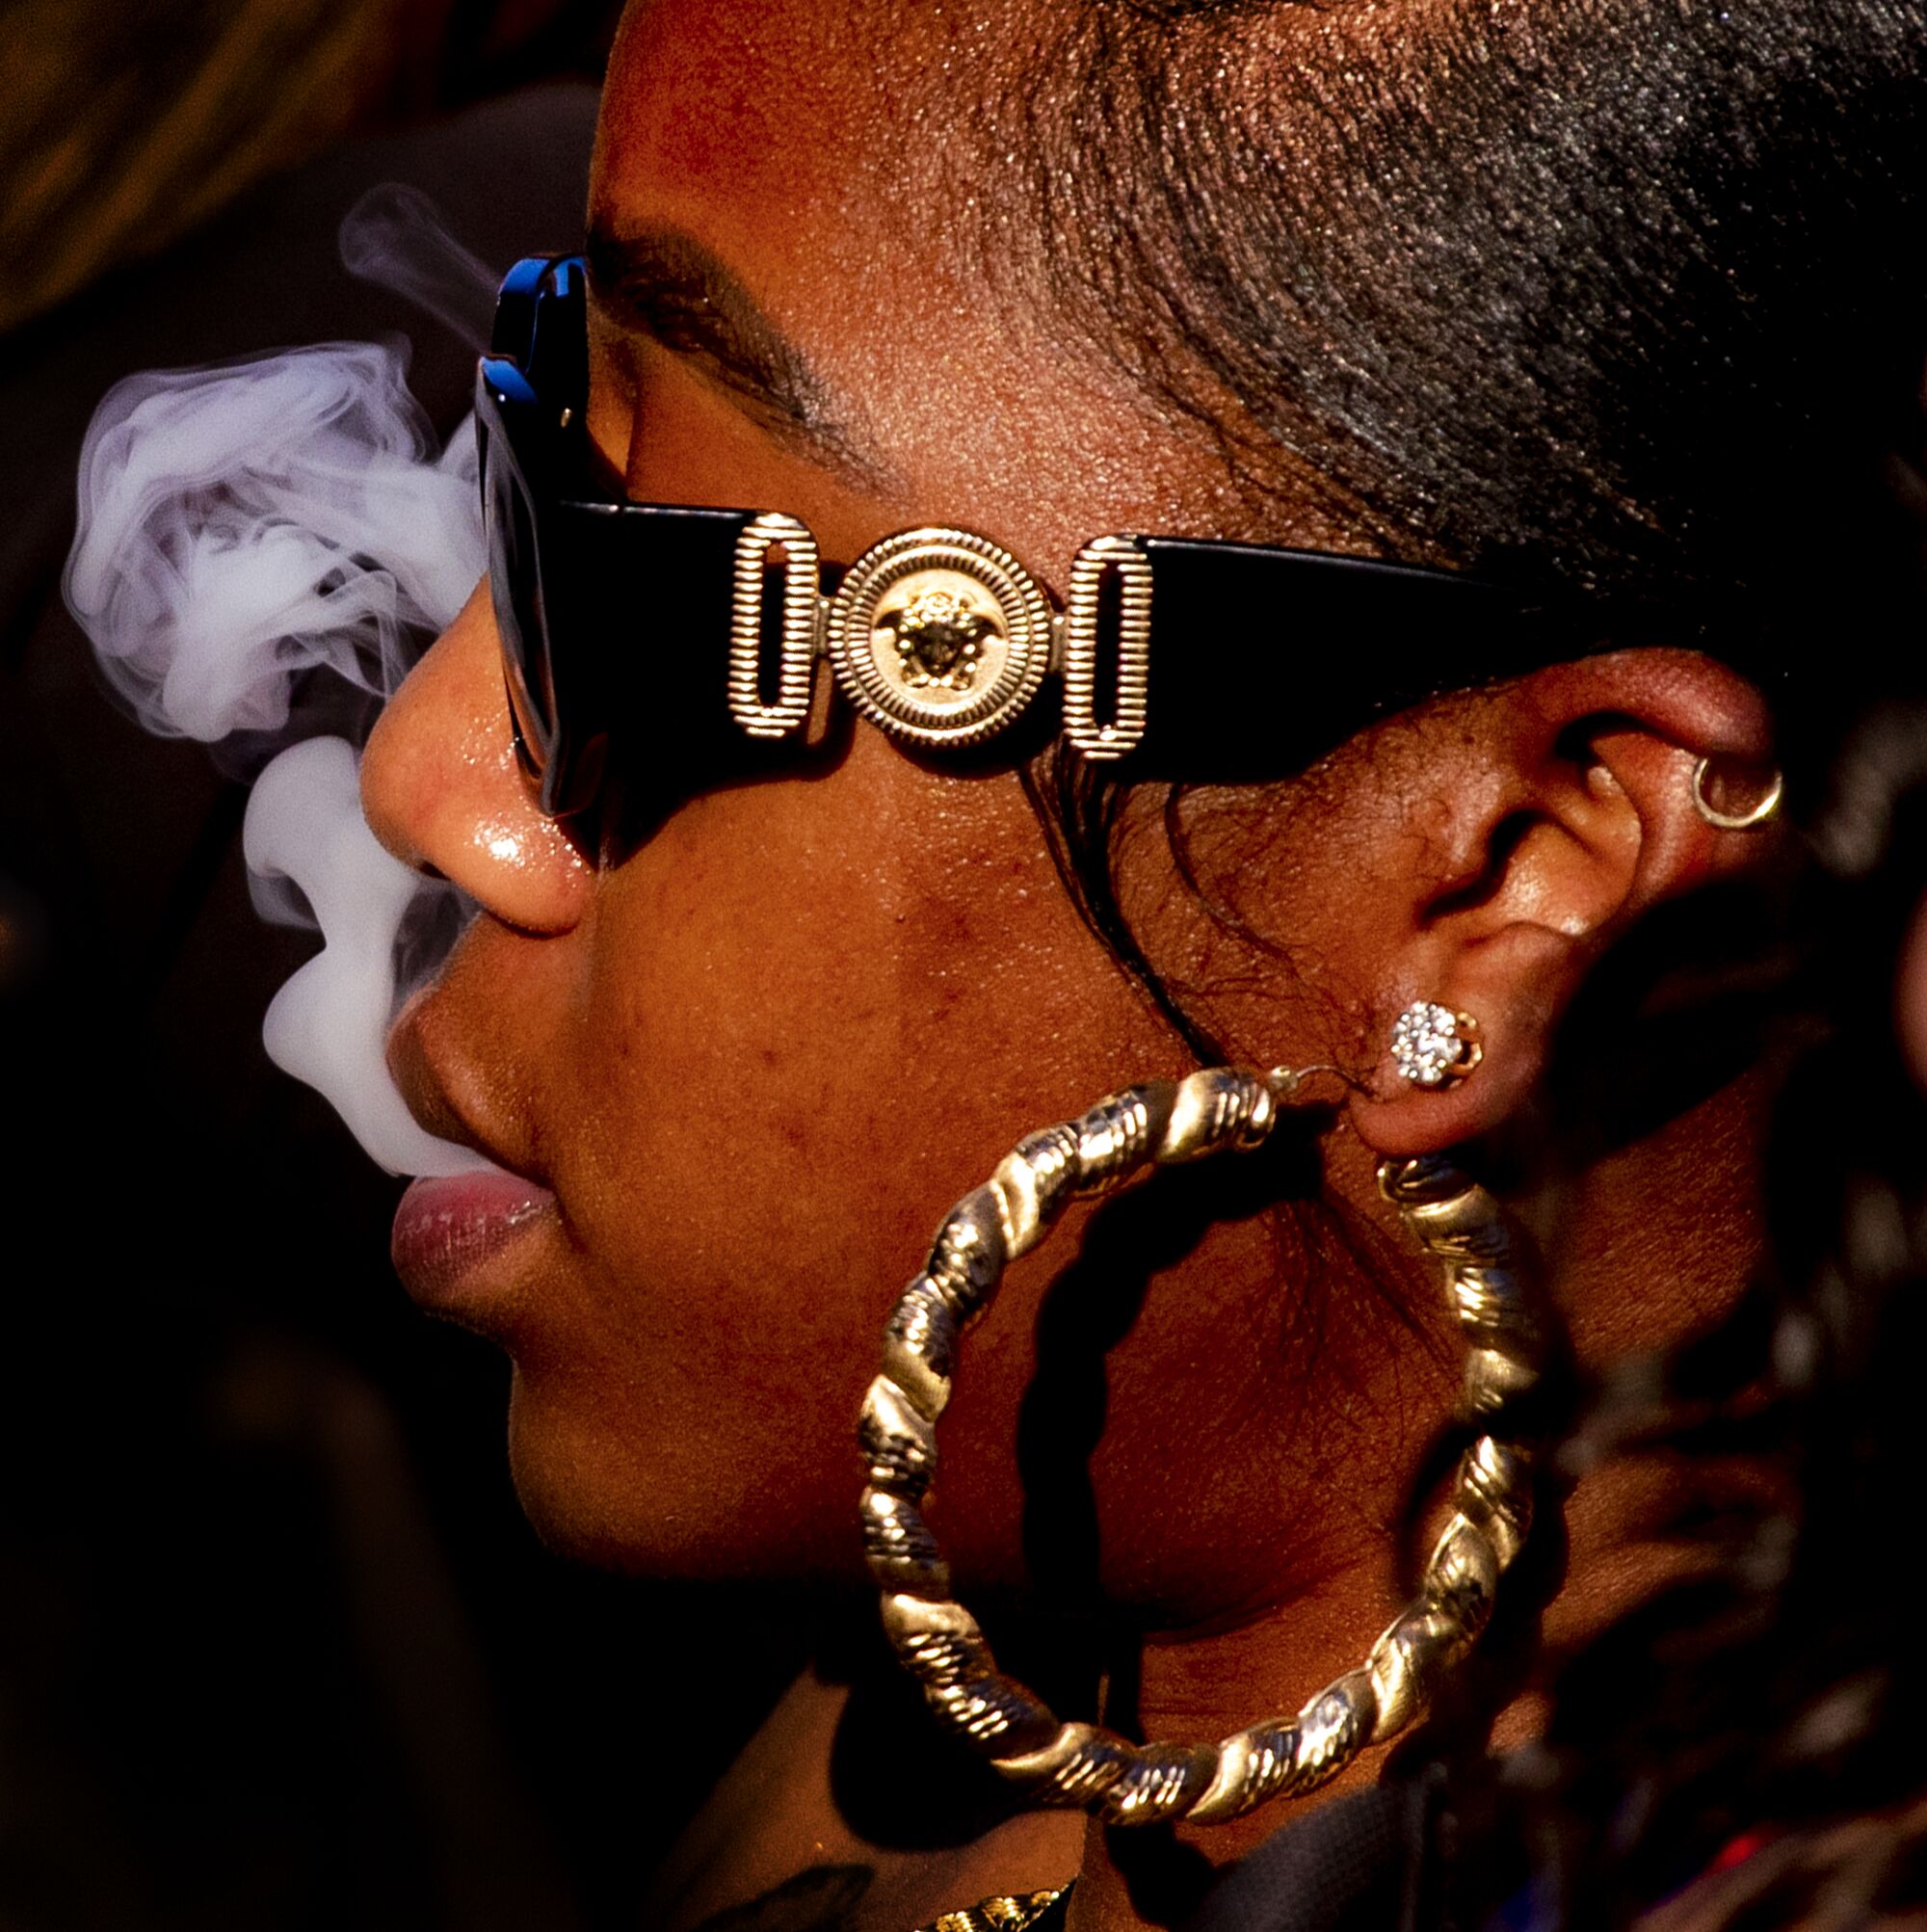 A woman wearing sunglasses and giant hoop earrings exhales smoke 